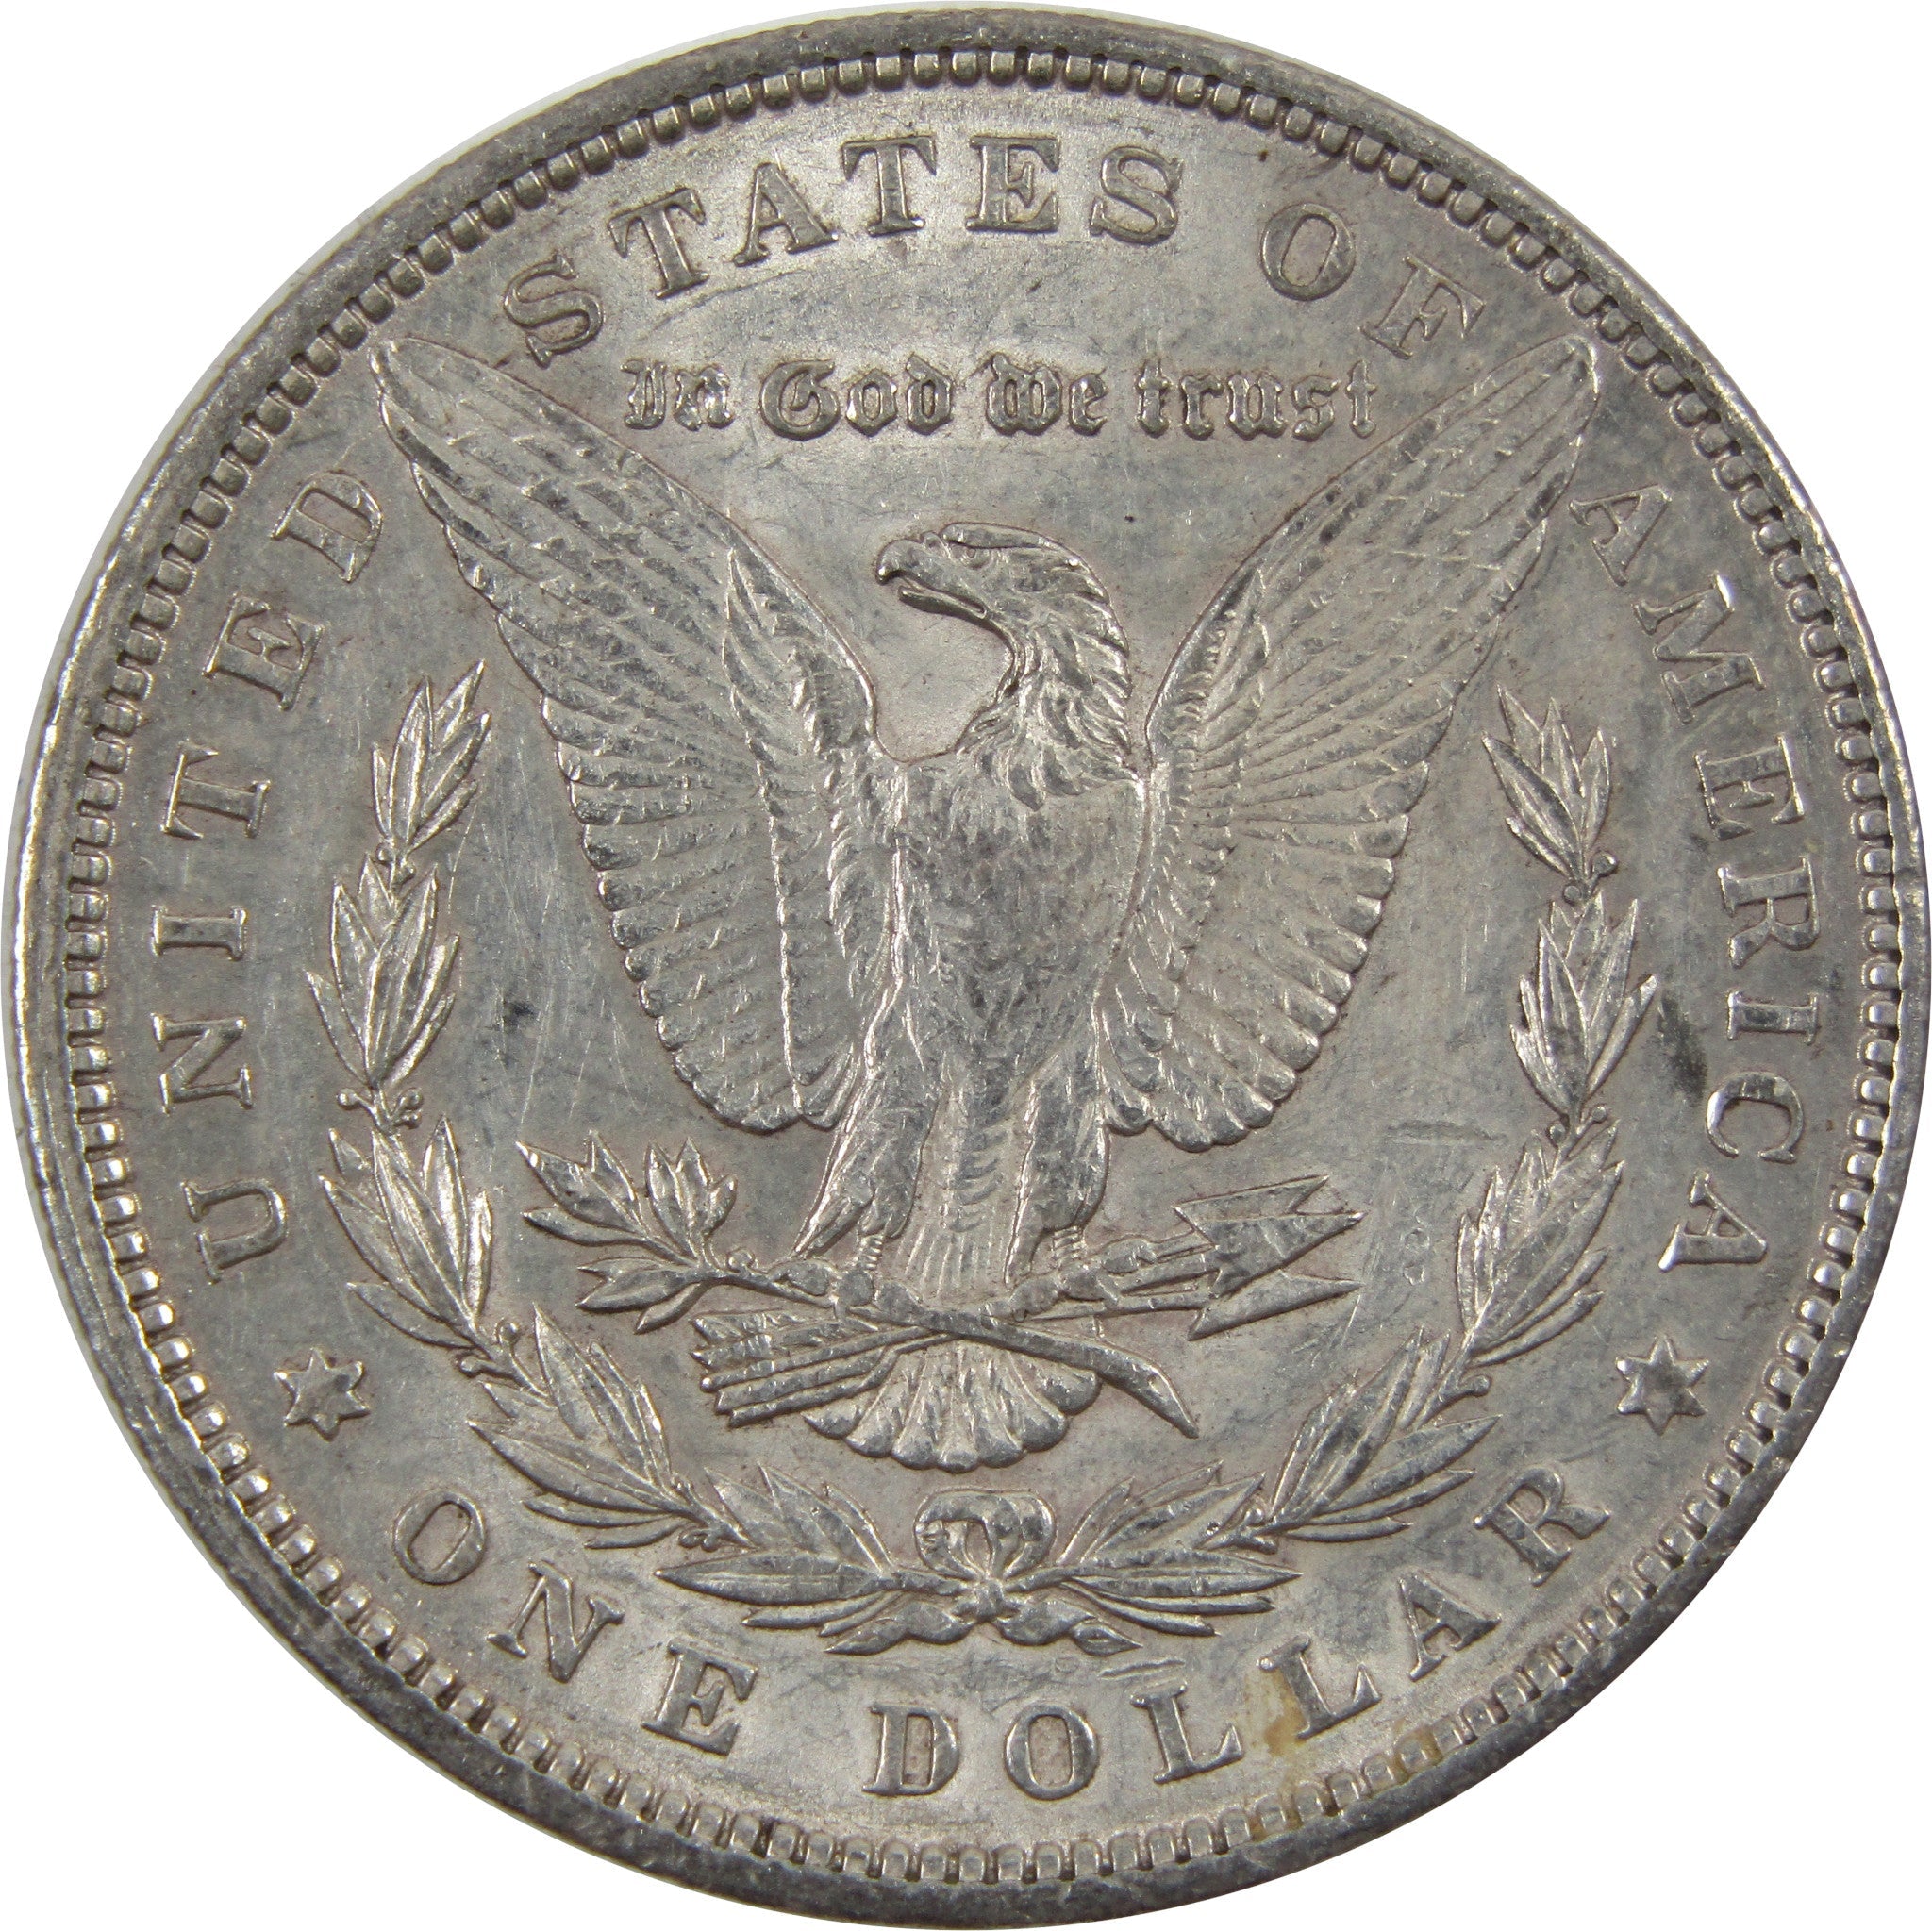 1900 Morgan Dollar AU About Uncirculated 90% Silver $1 Coin SKU:I5525 - Morgan coin - Morgan silver dollar - Morgan silver dollar for sale - Profile Coins &amp; Collectibles